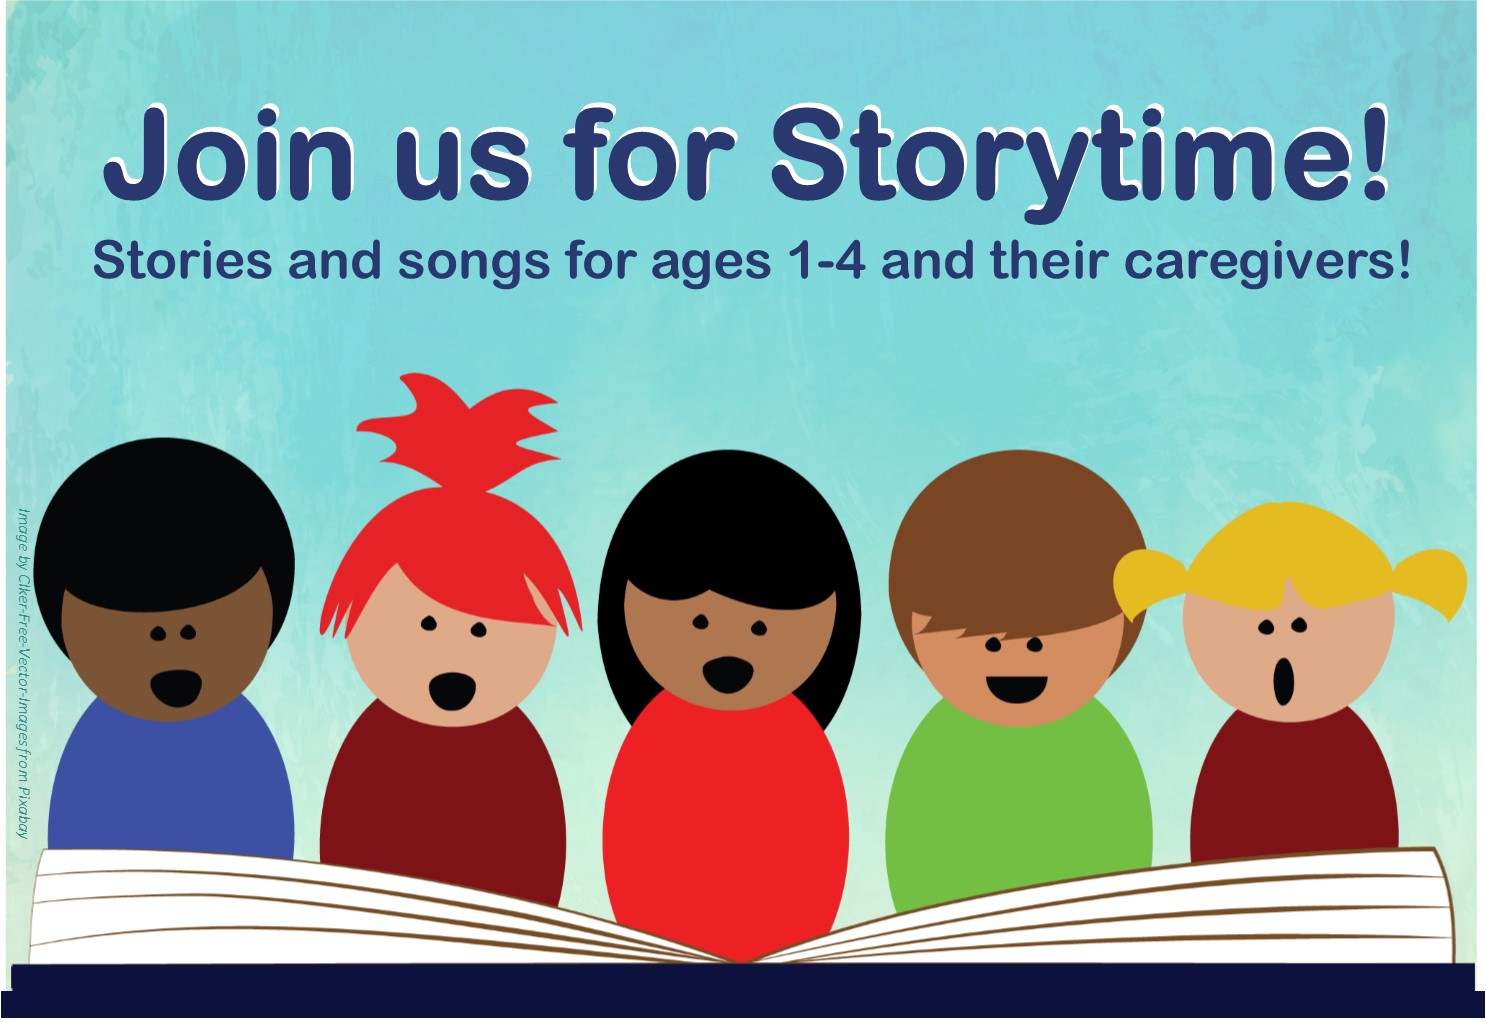 Join us for Storytime! Stories and songs for ages 1-4 and their caregivers. Image of singing children and a large book.